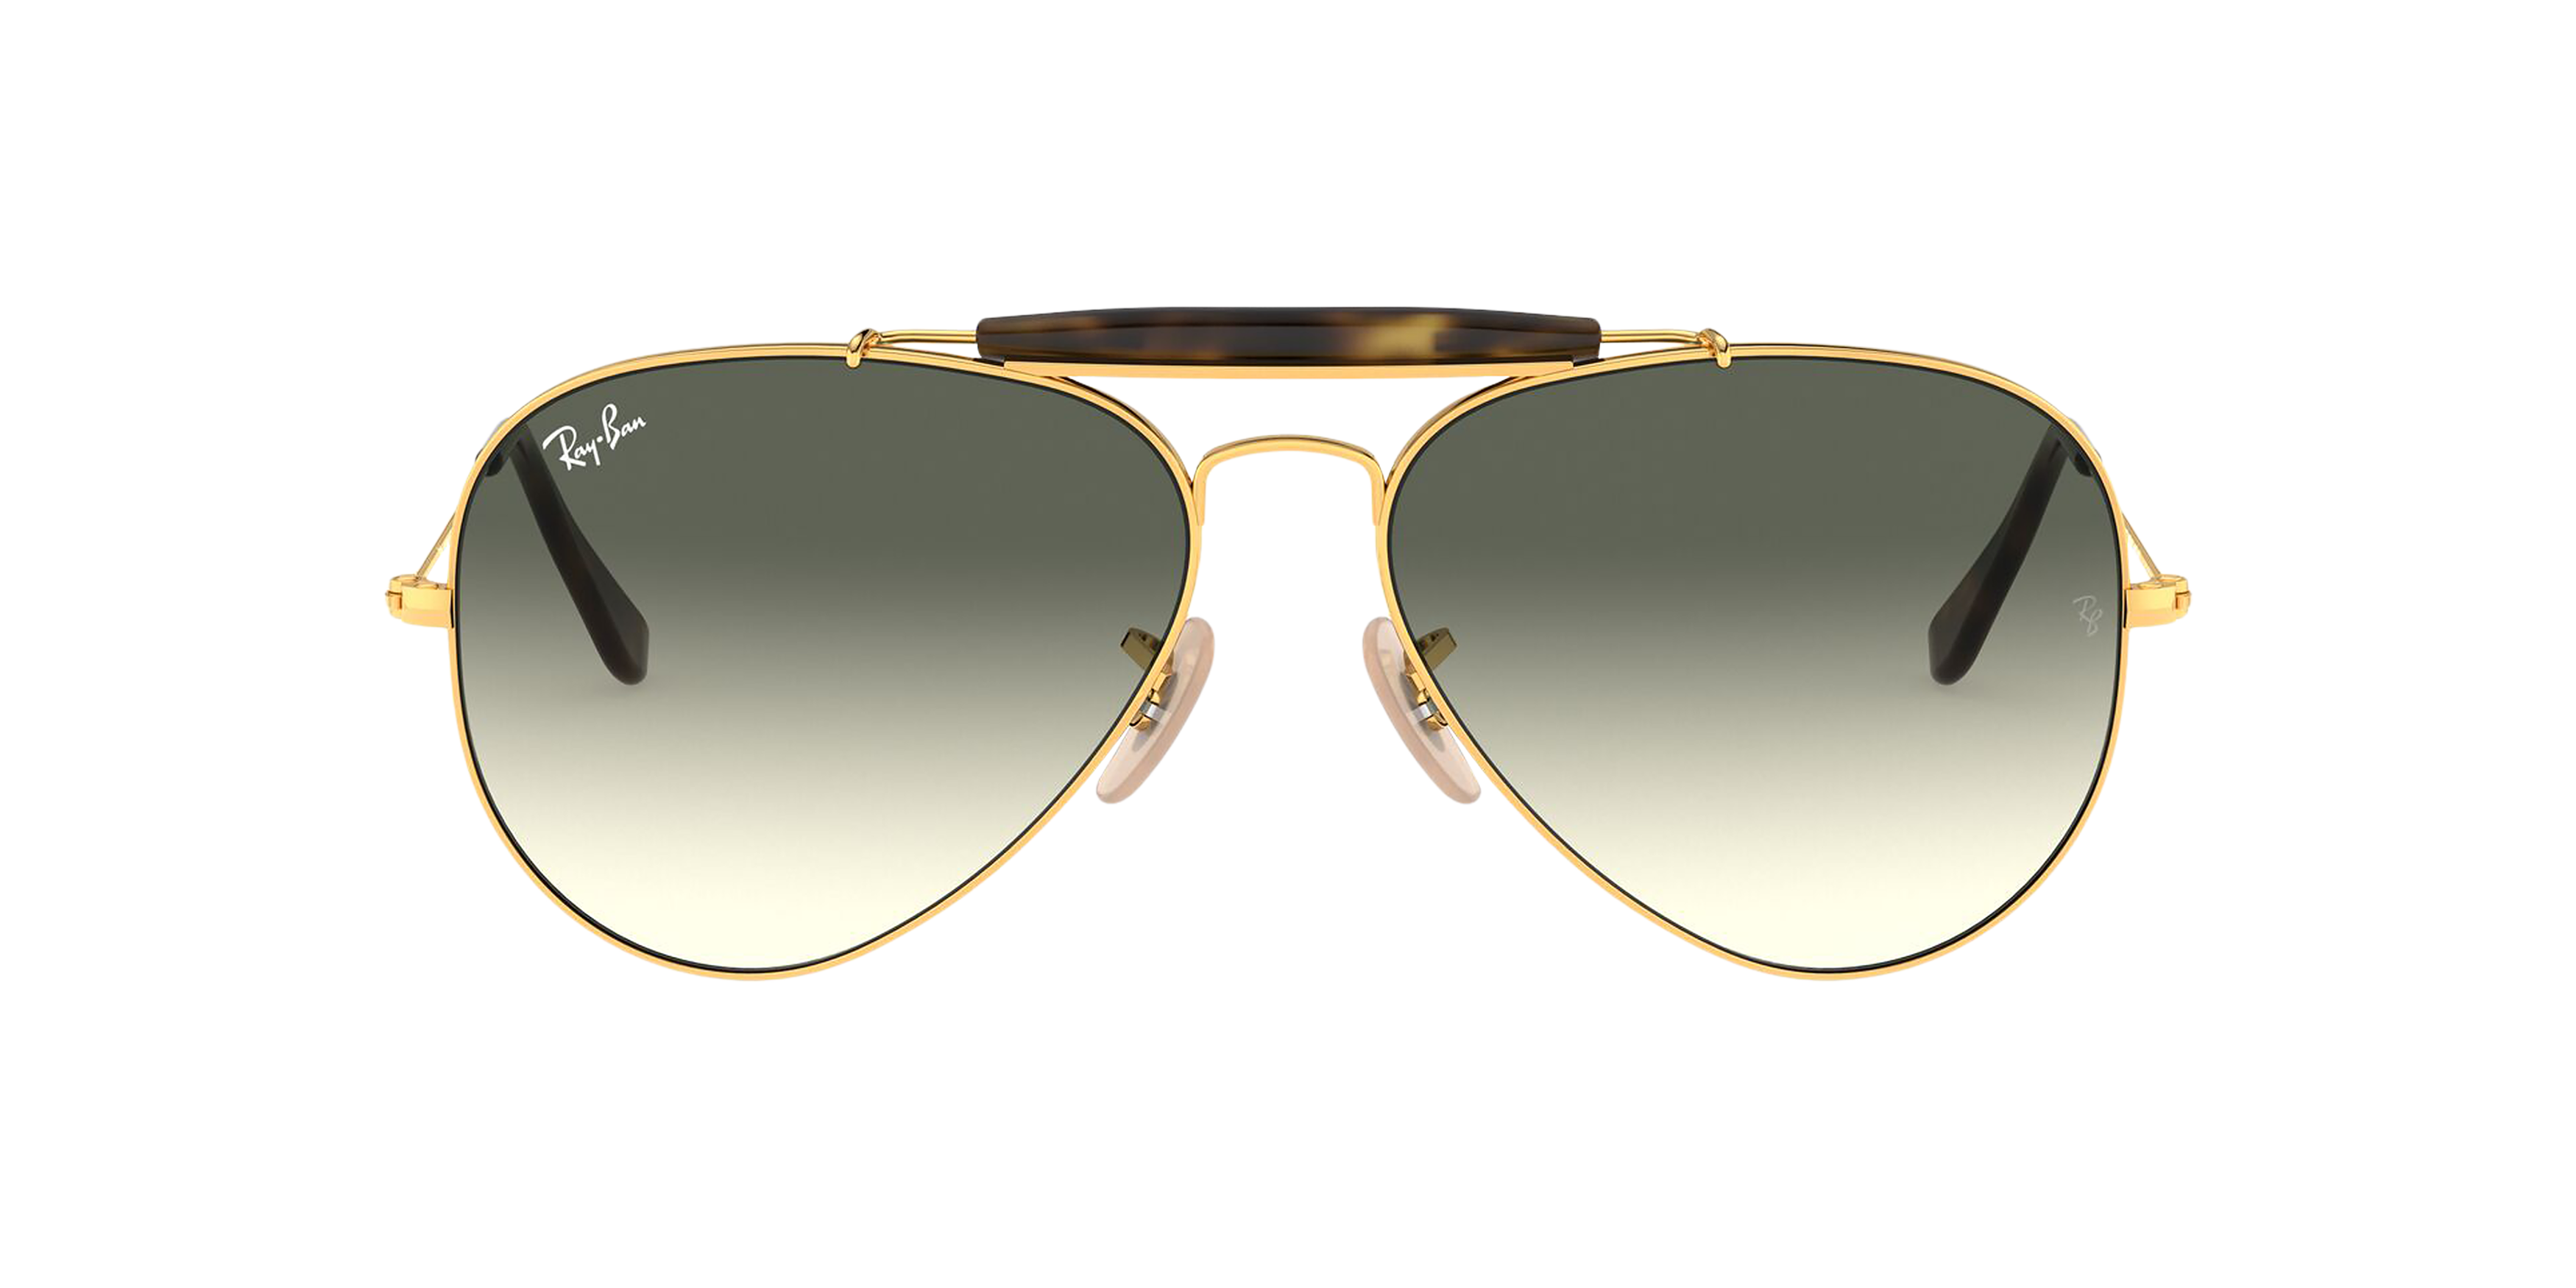 [products.image.front] Ray-Ban Outdoorsman Havana Collection RB3029 181/71